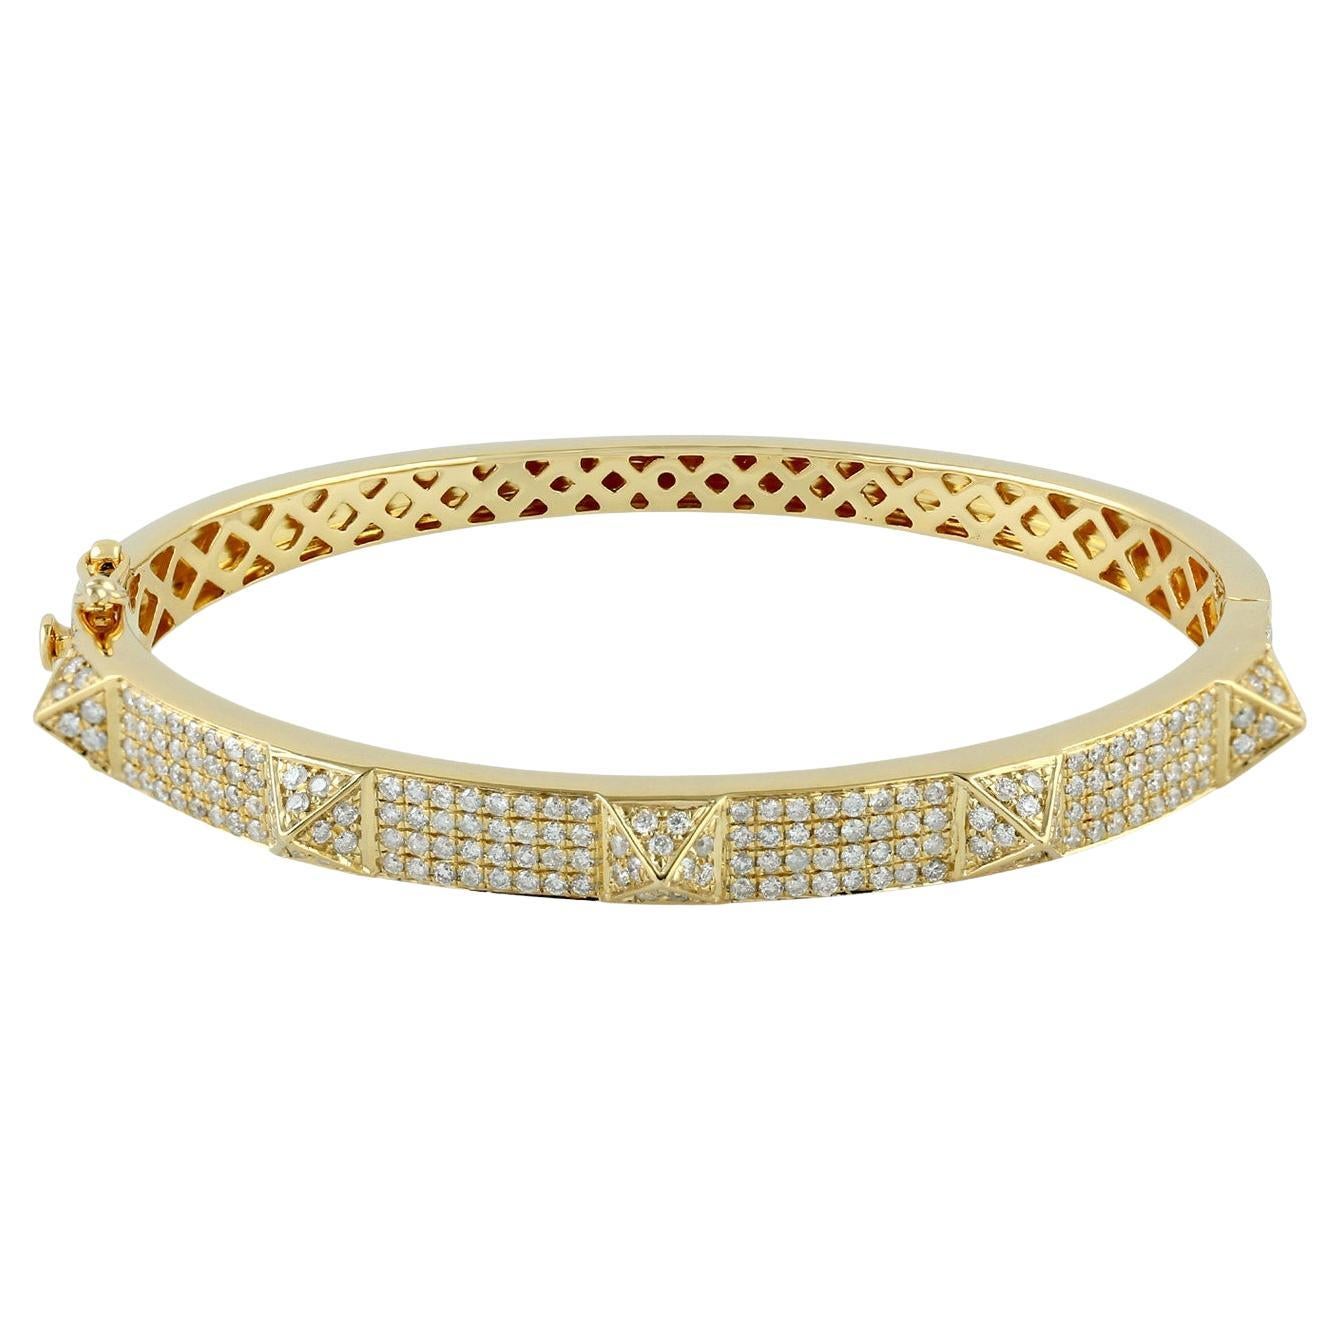 Pave Diamond Spike Bangle Made In 18k Yellow Gold For Sale